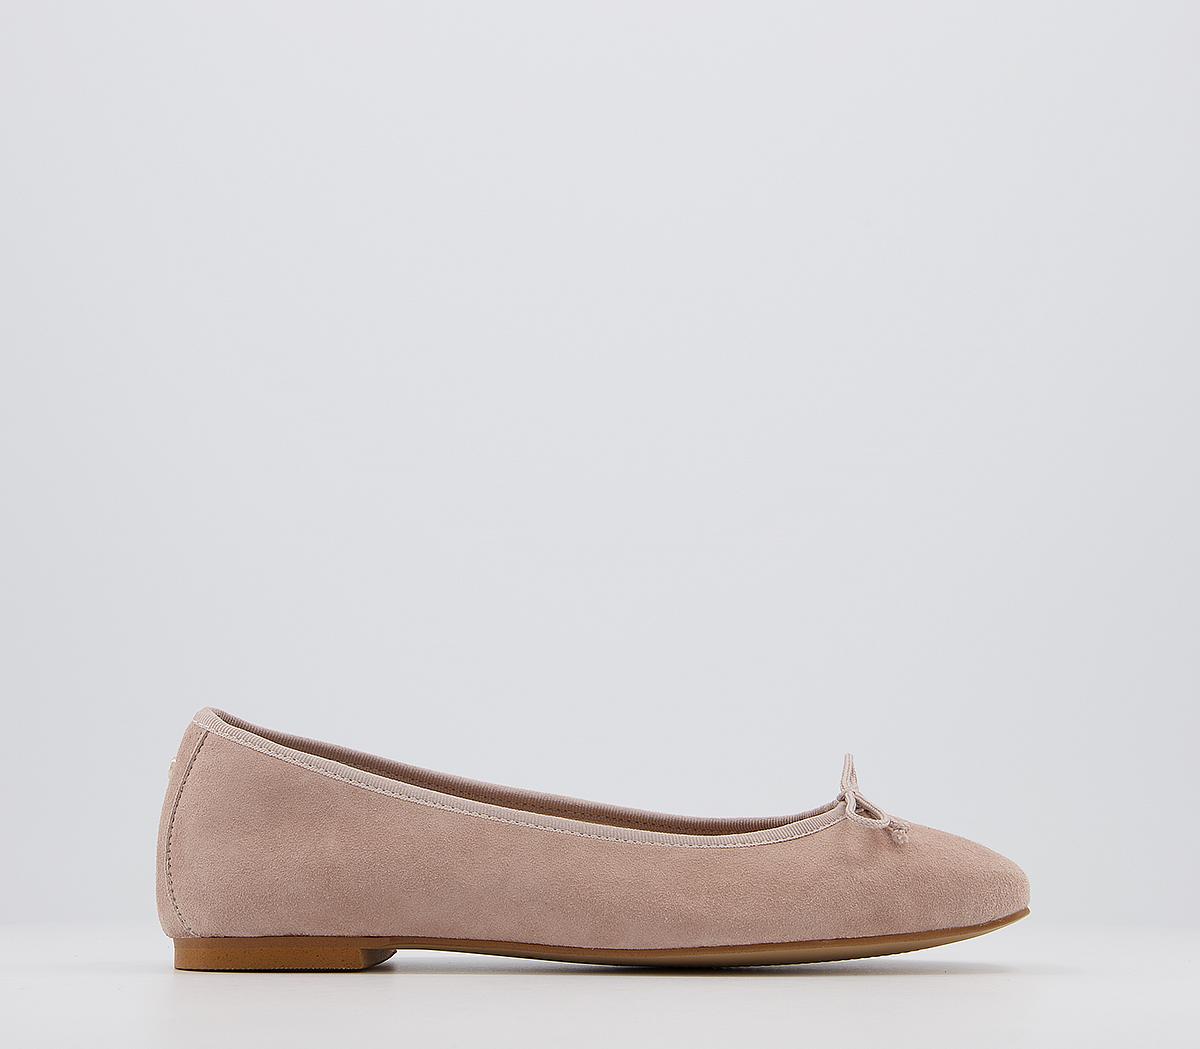 OFFICEFly away Square Toe Bow Ballet FlatsBlush Suede